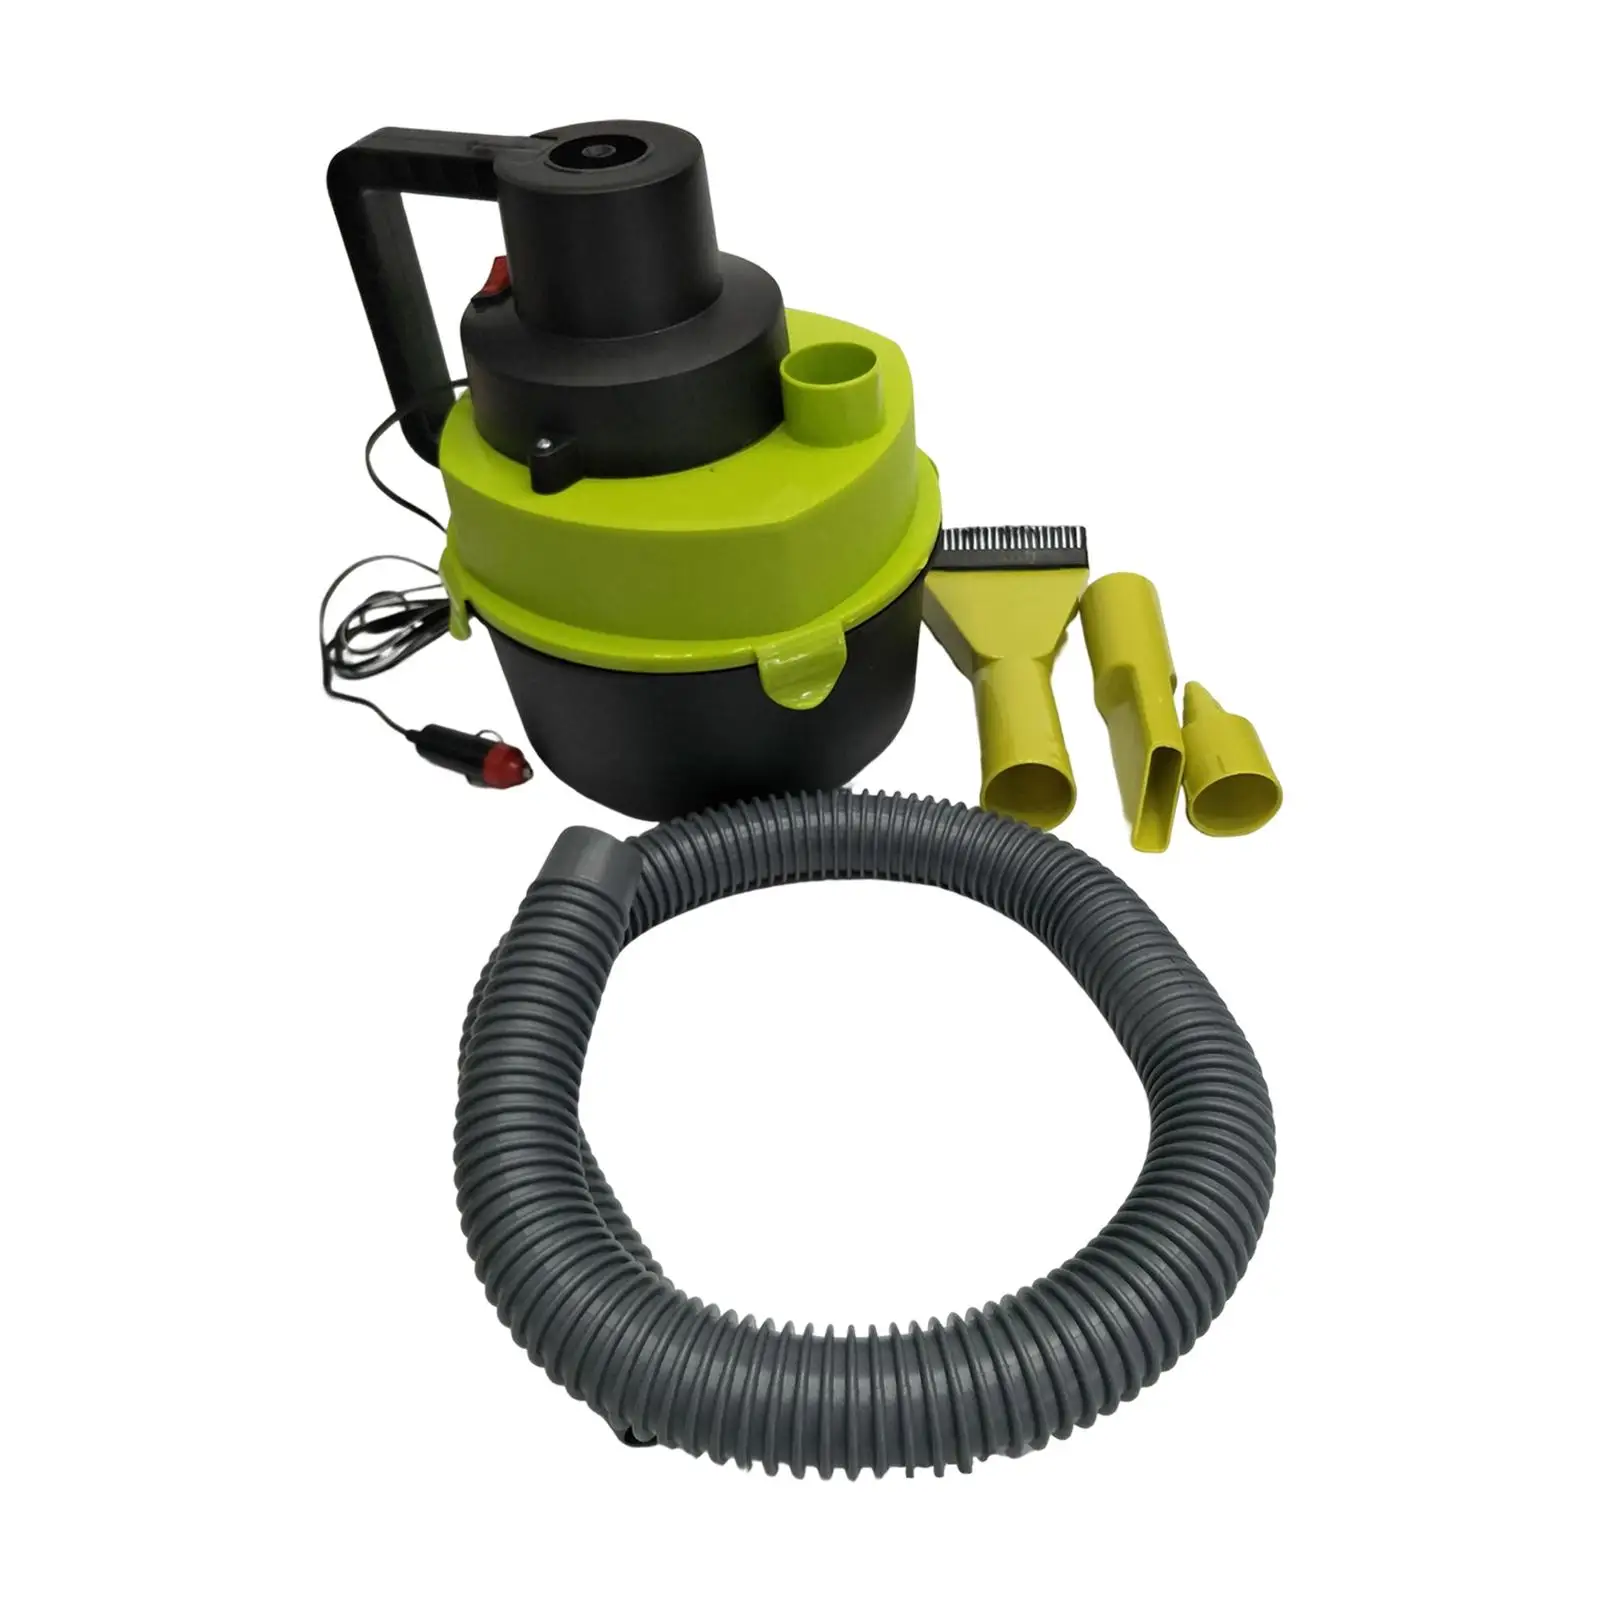 Portable Shop Vacuum with Attachments Multifunctional Debris Blowing Function dry wet Vacuum for trucks RV Garage Corners